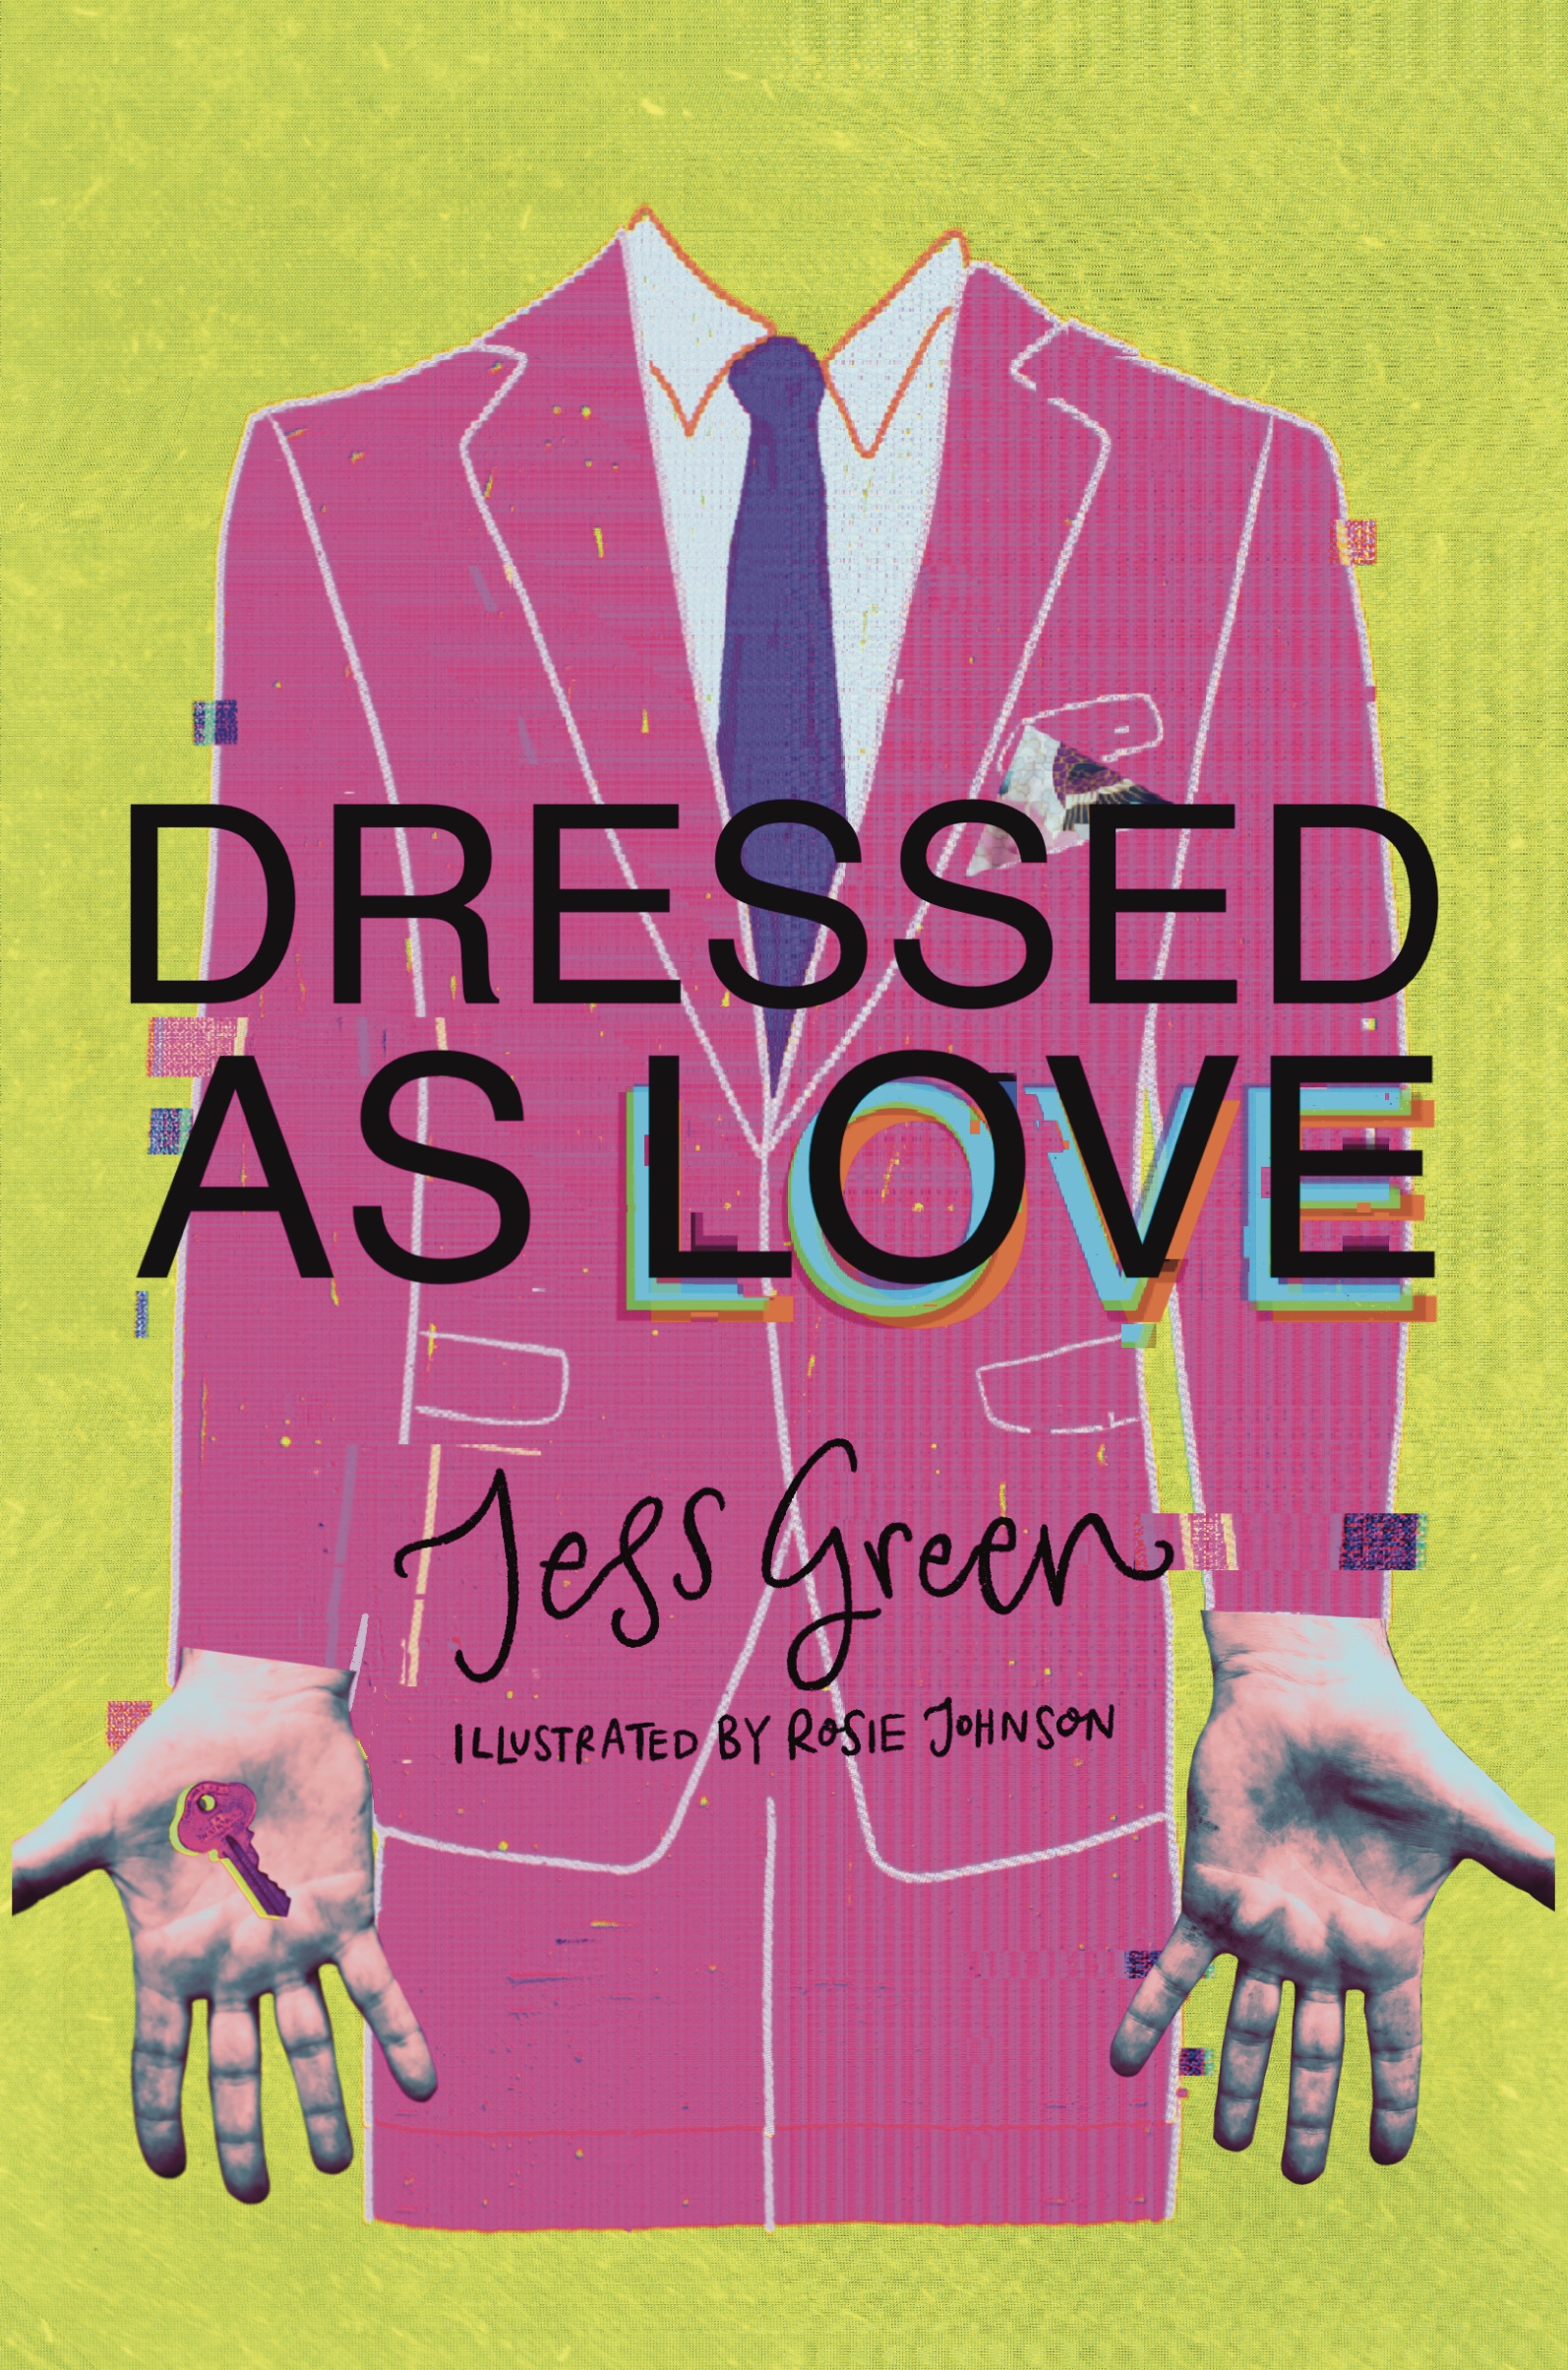 Banner Image for "Dressed as Love"